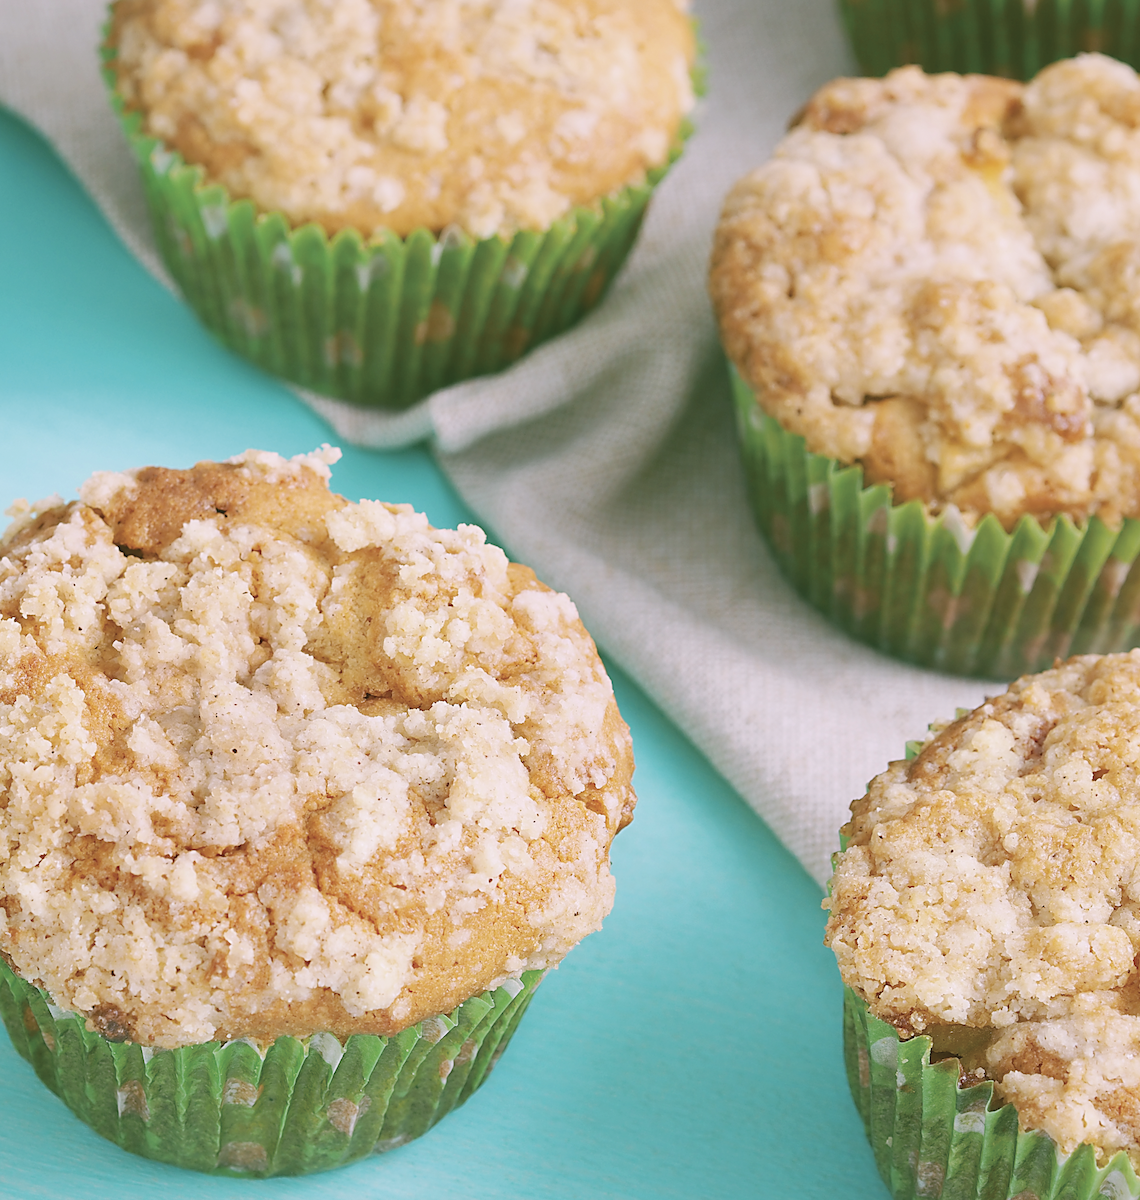 Crumbly Apple-Pumpkin Streusel Muffins